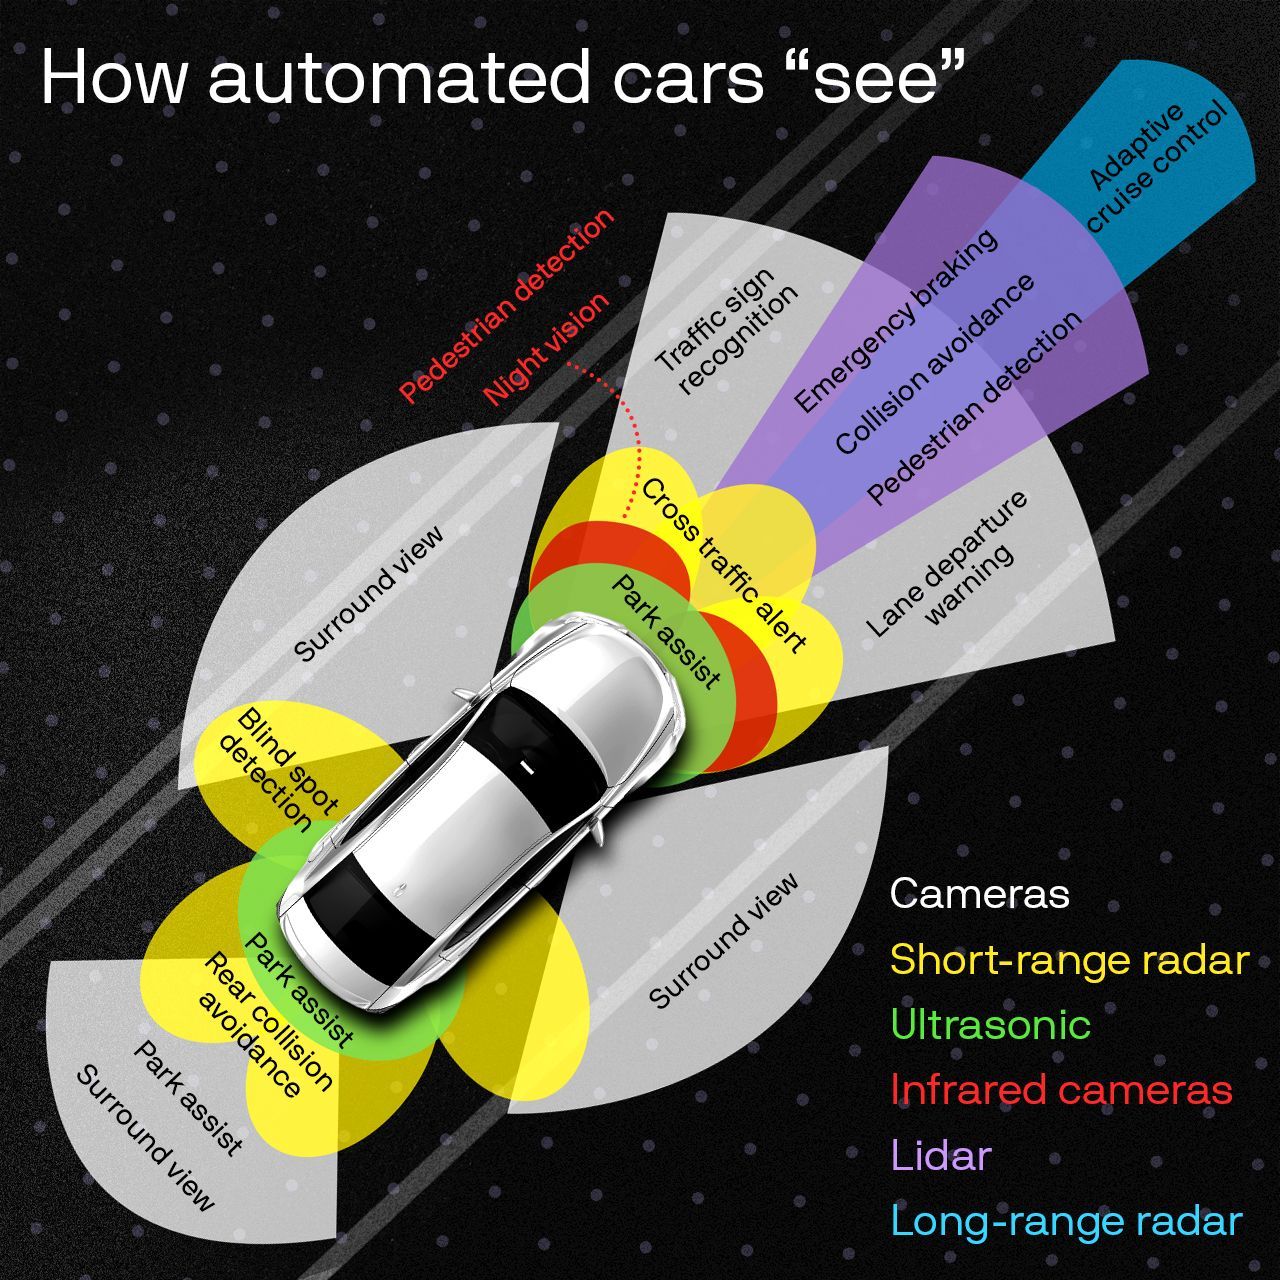 Infographic showing an overhead view of car with the automated technologies labeled and categorized